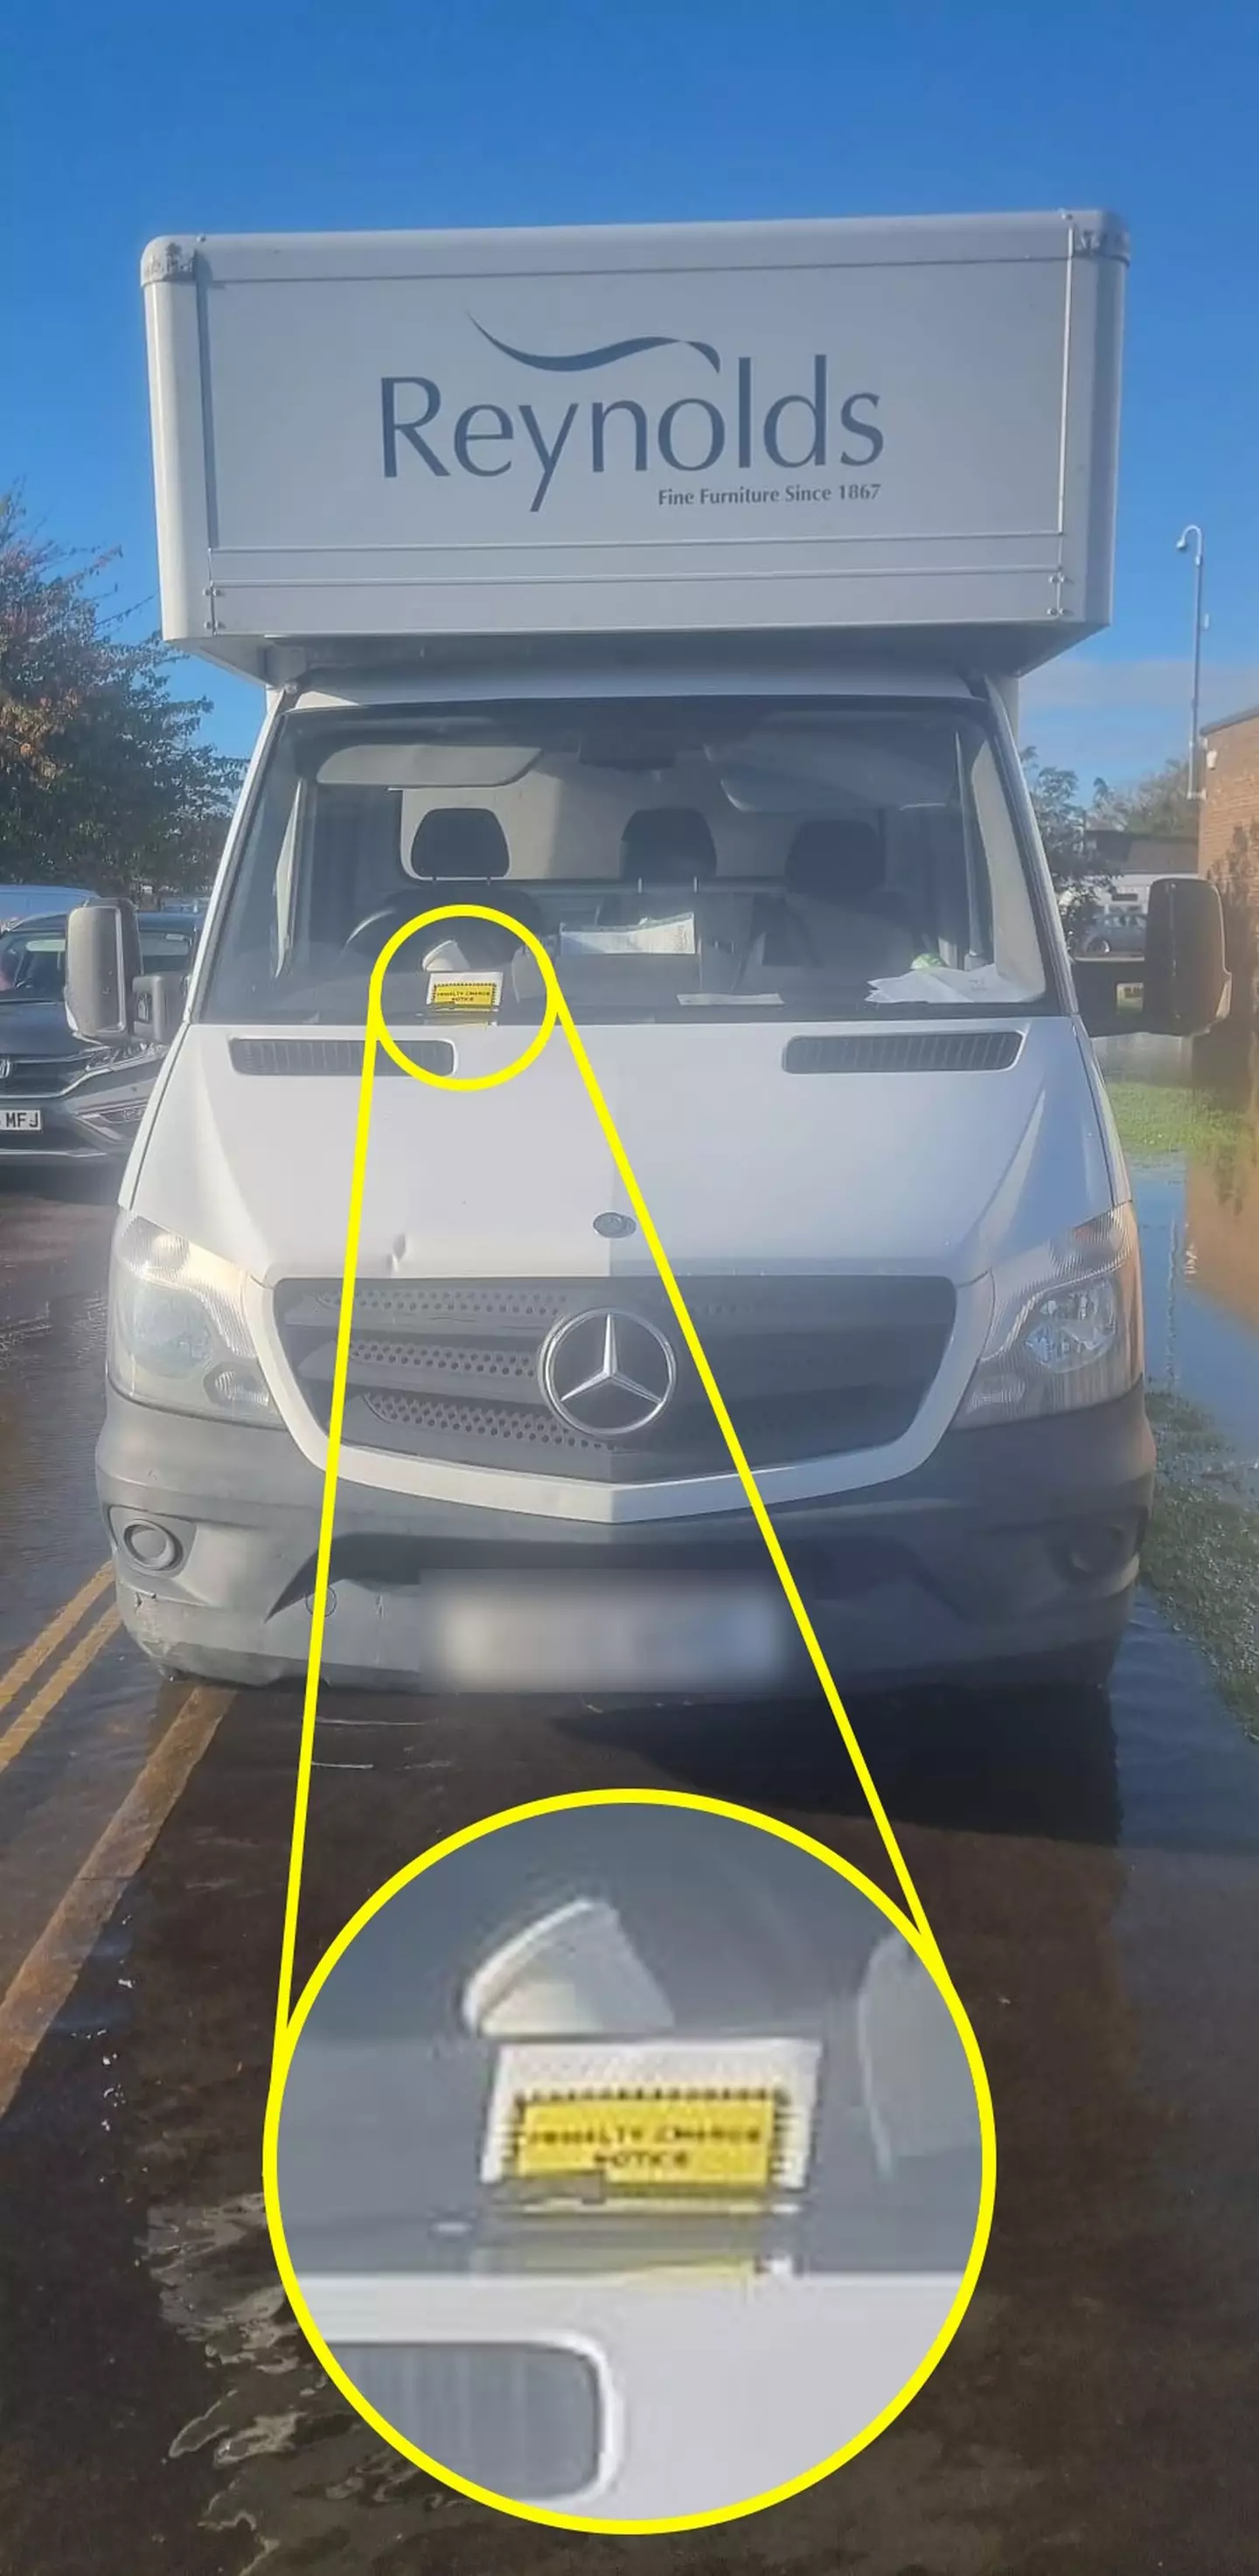 The director of a family furniture business was 'shocked' after a traffic warden slapped a parking ticket on the store's van - despite it being parked under two feet of flood water.